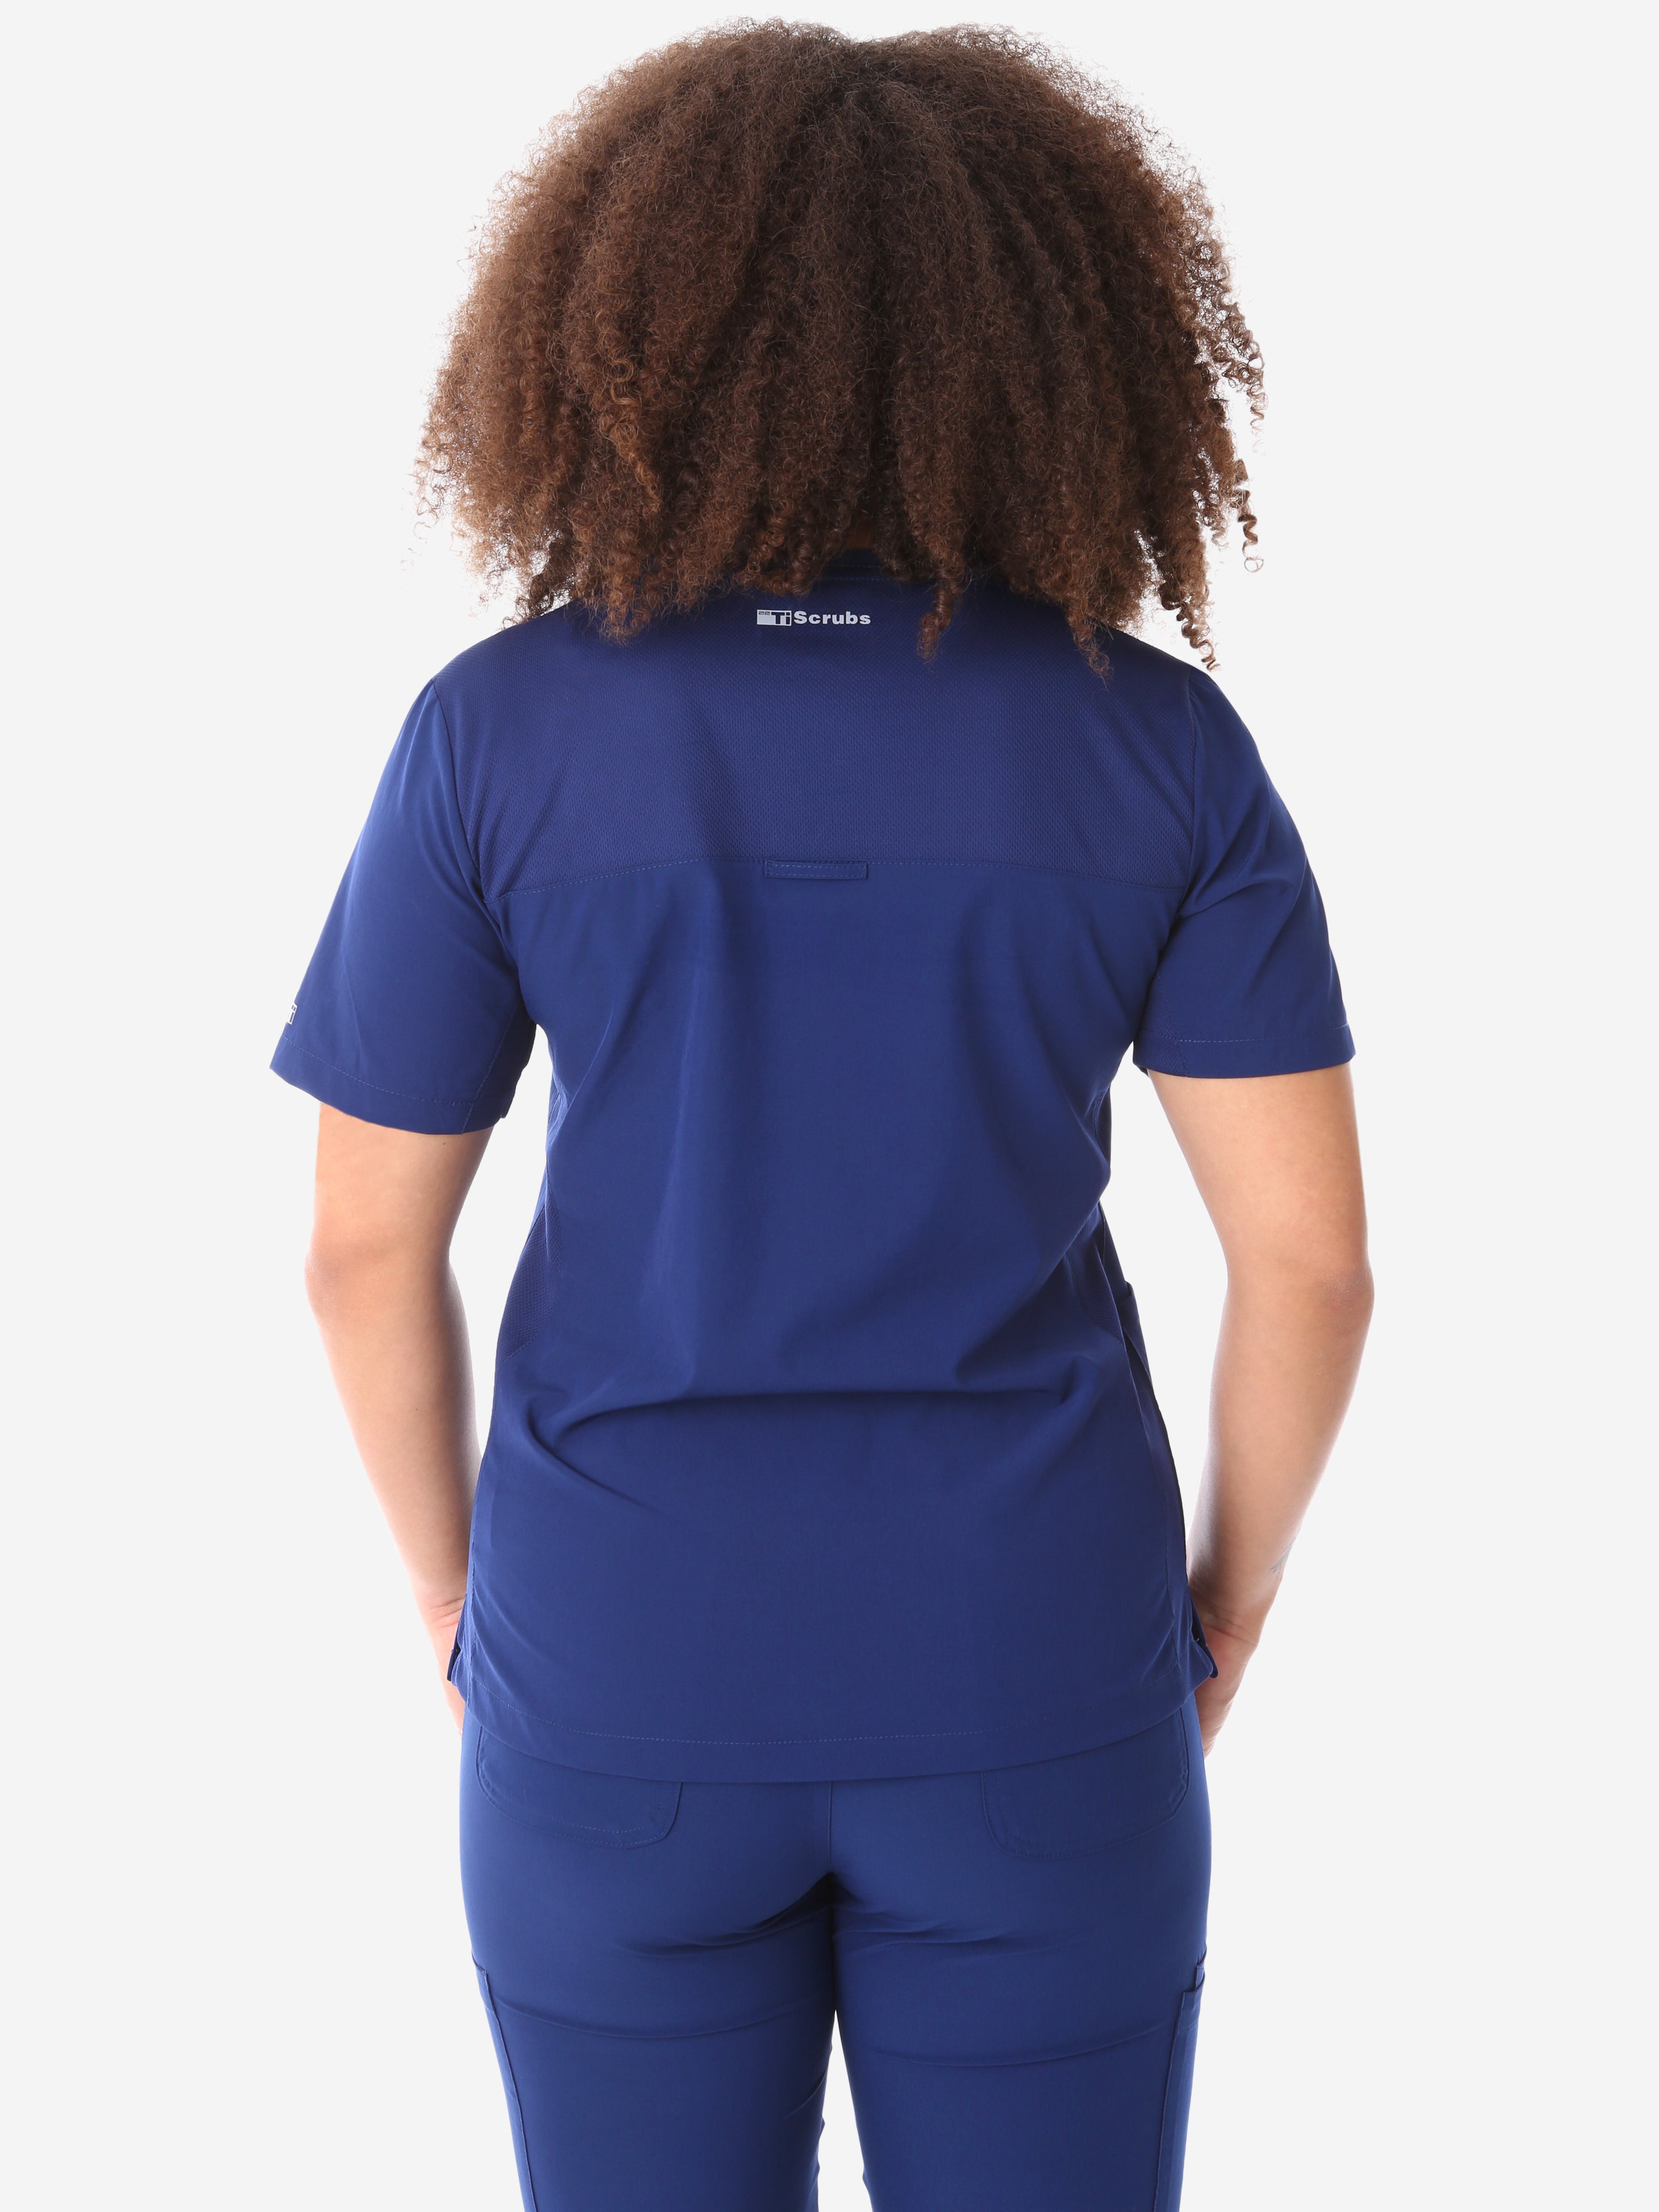 Women's Four-Pocket Scrub Top Navy Blue Top Only Back View